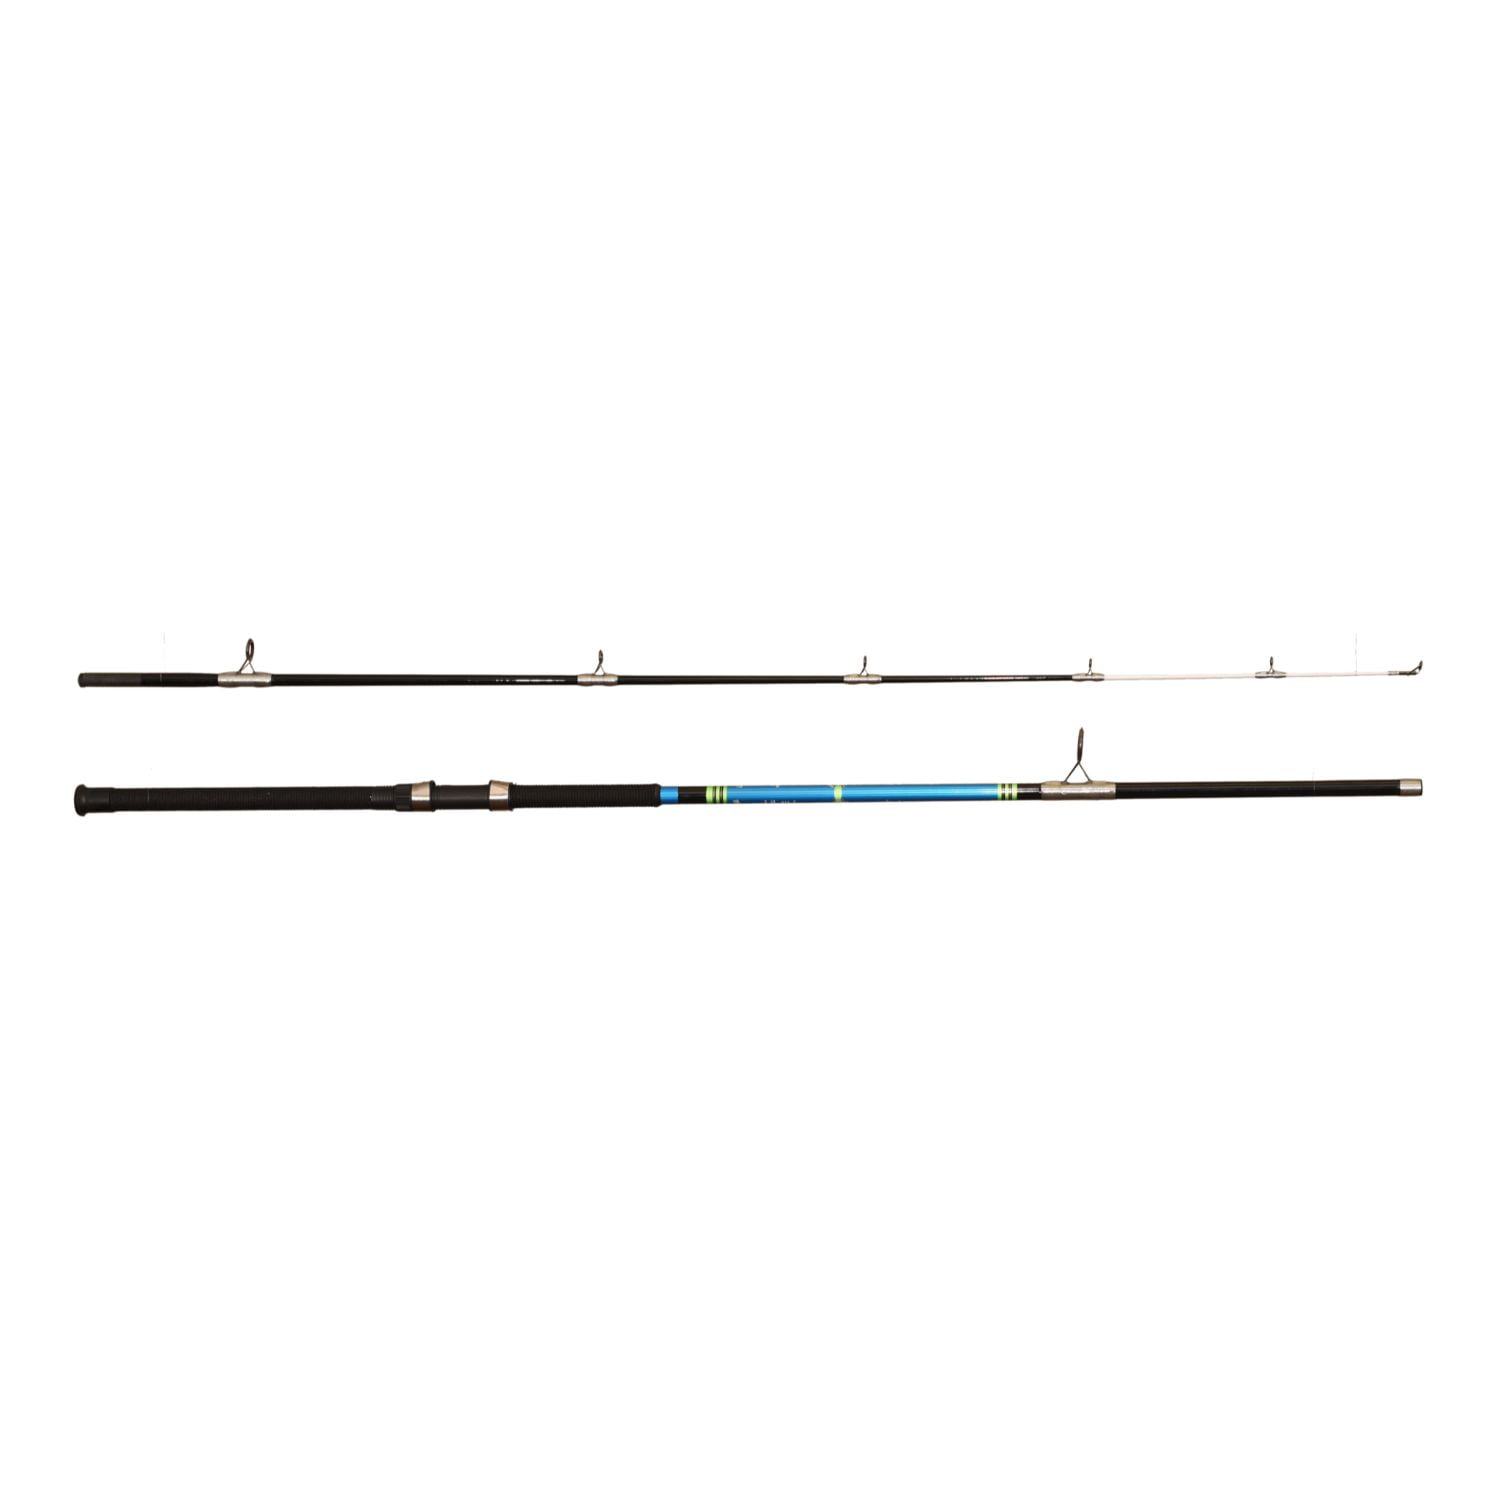 BnM 8' 11'' TENNESSEE HANDLE FLOAT AND FLY ROD FFTH92 B&M CRAPPIE POLE SM MOUTH 